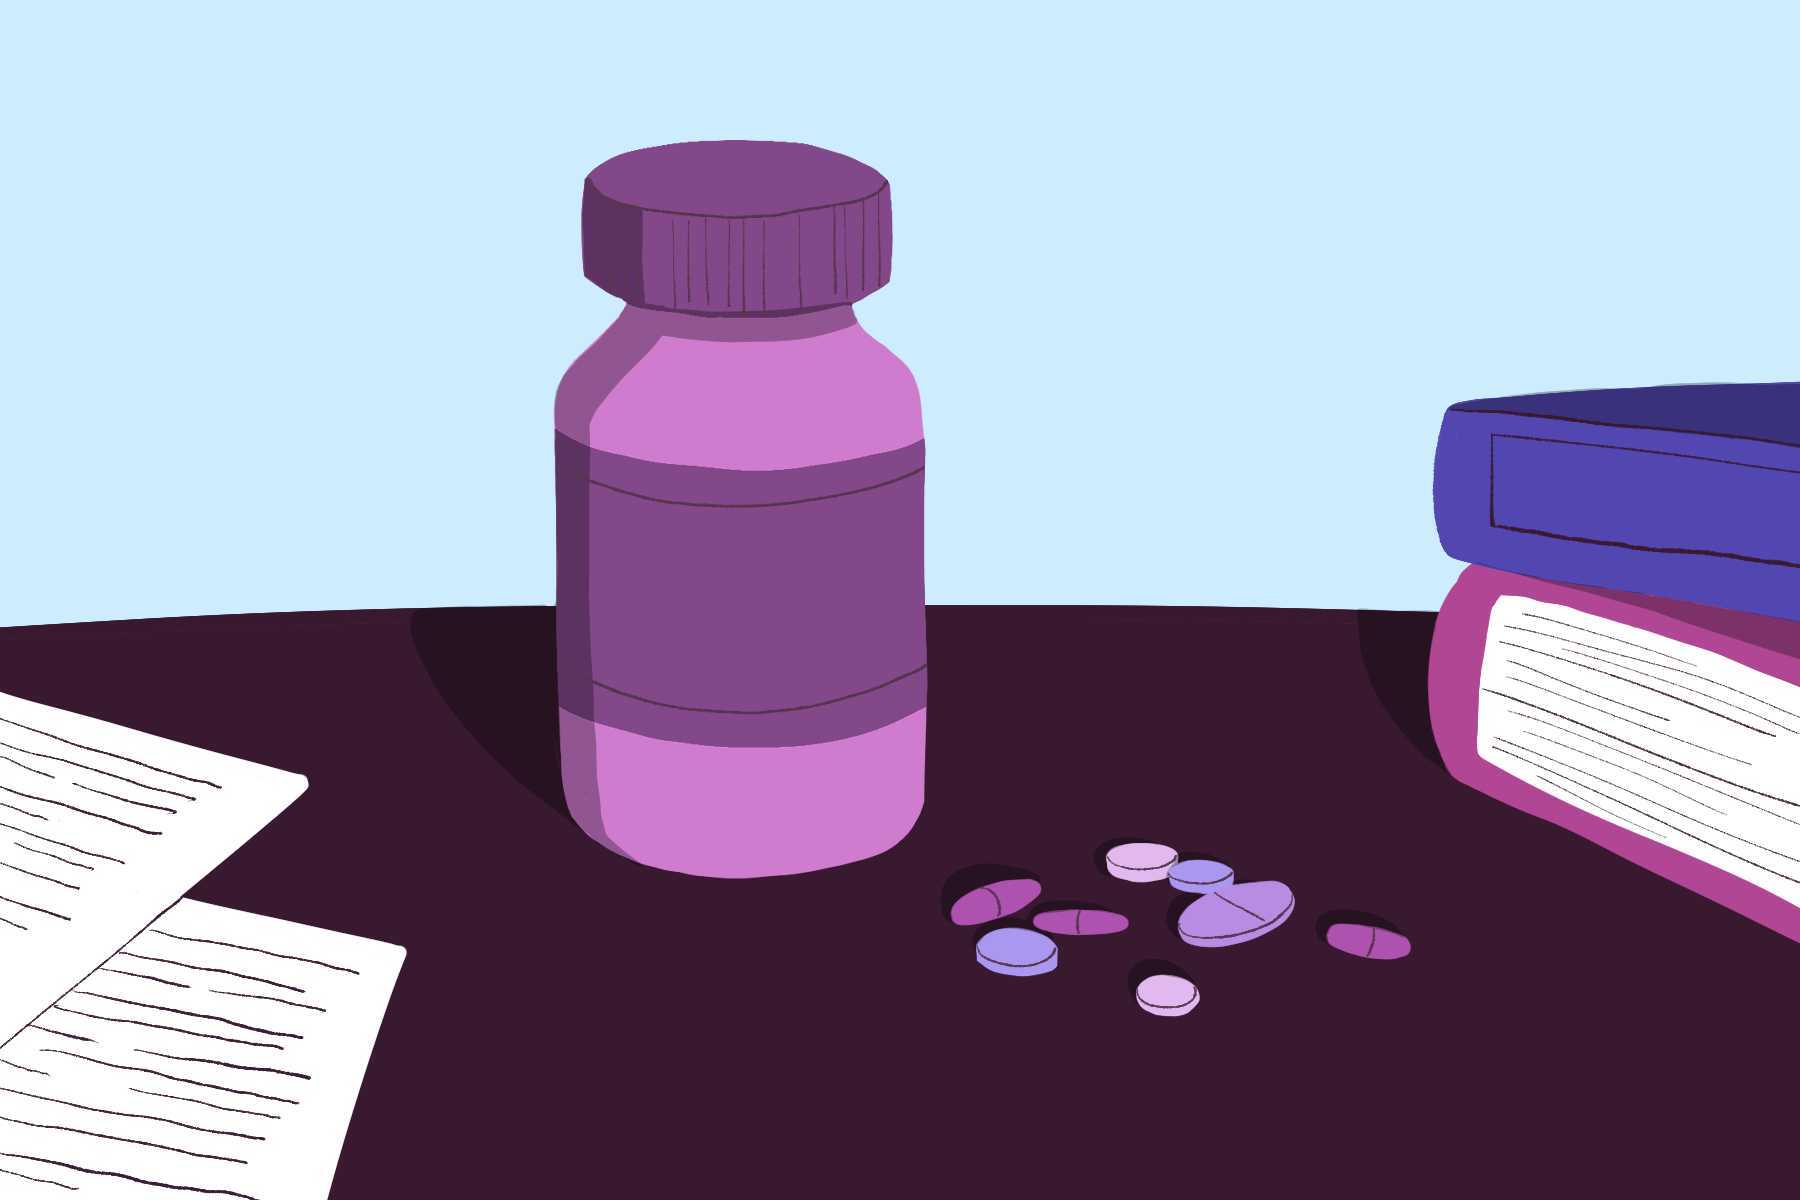 In an article about diet culture, an illustration of pills